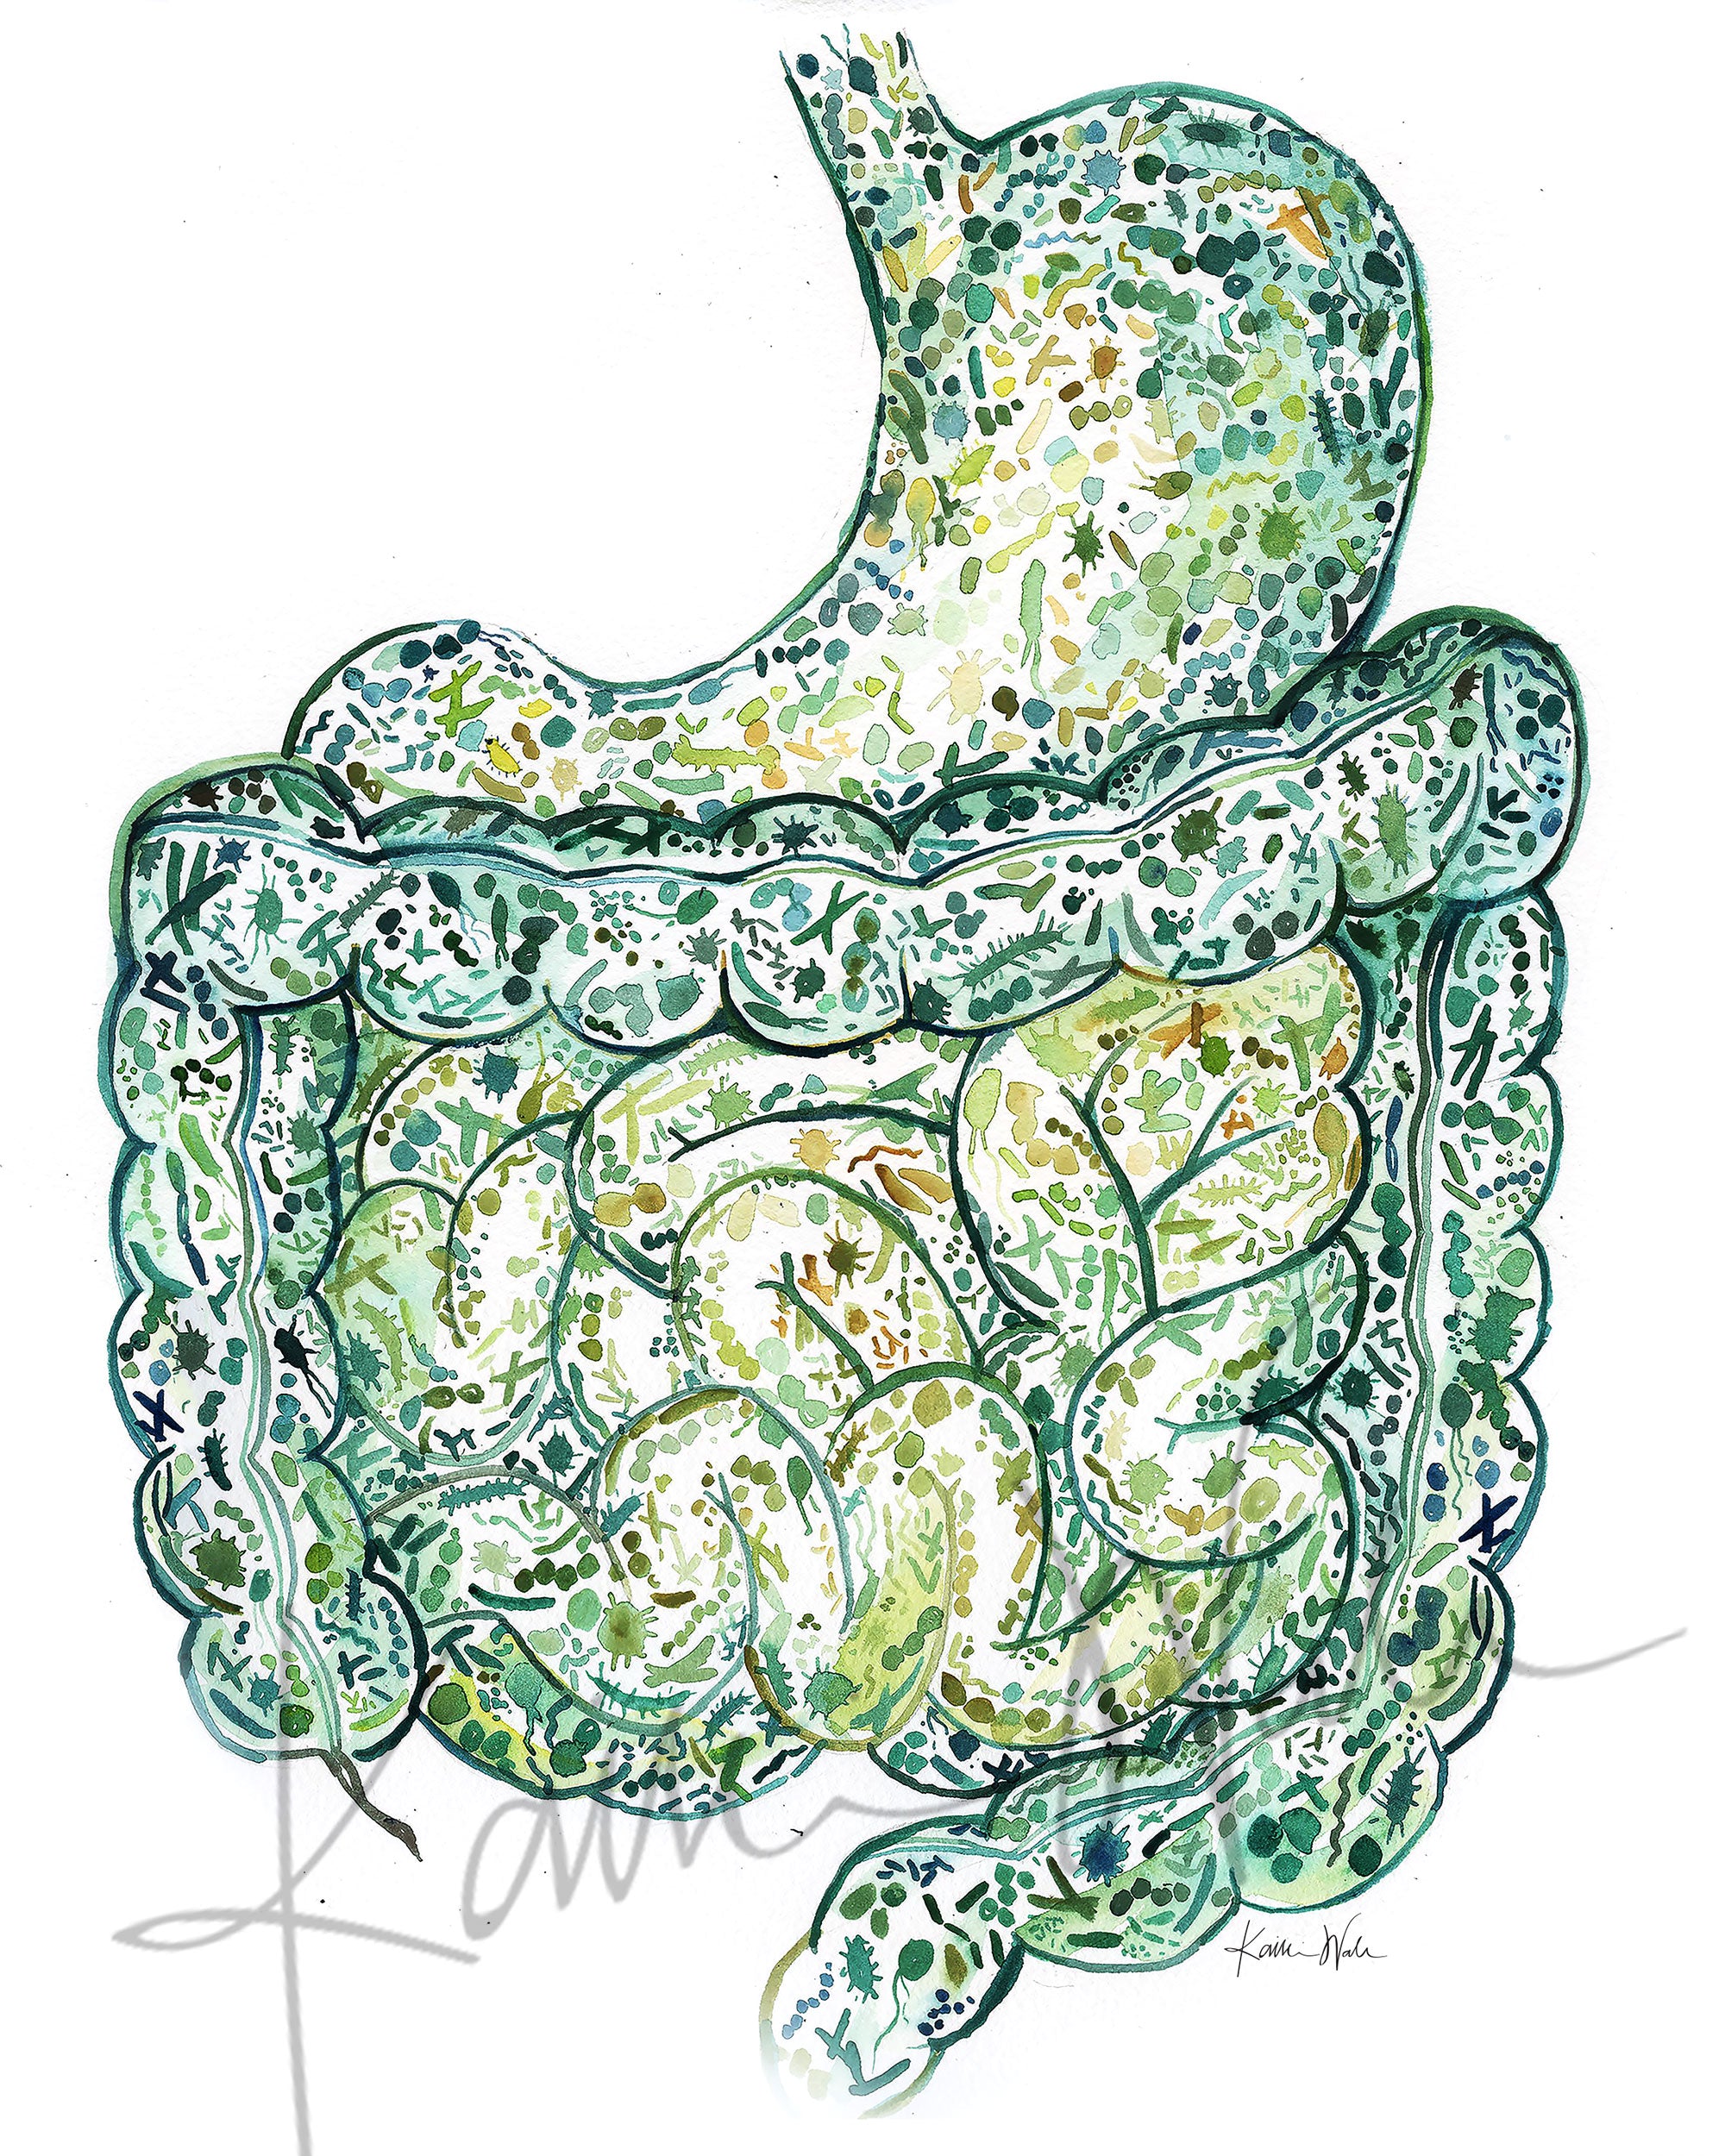 Unframed watercolor painting of the stomach and intestines showing the internal gut microbiome.